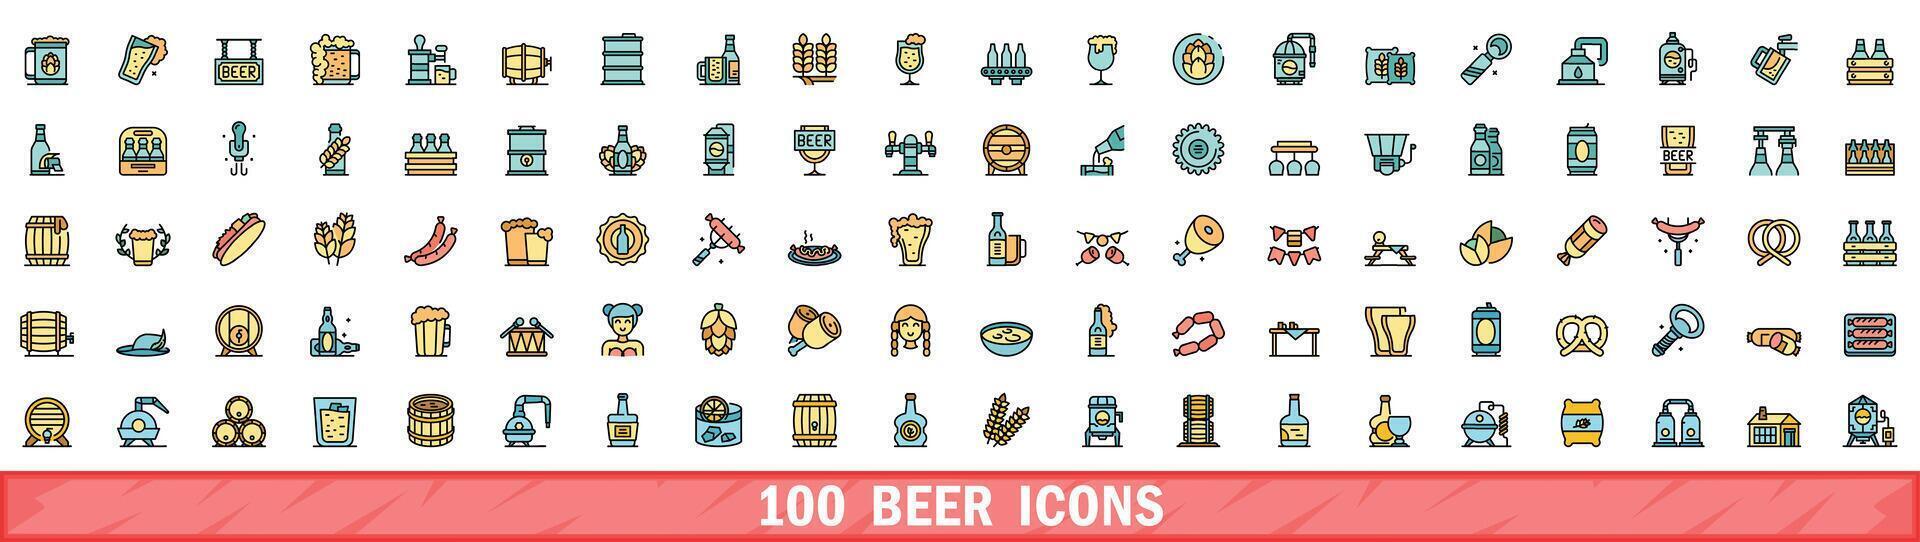 100 beer icons set, color line style vector